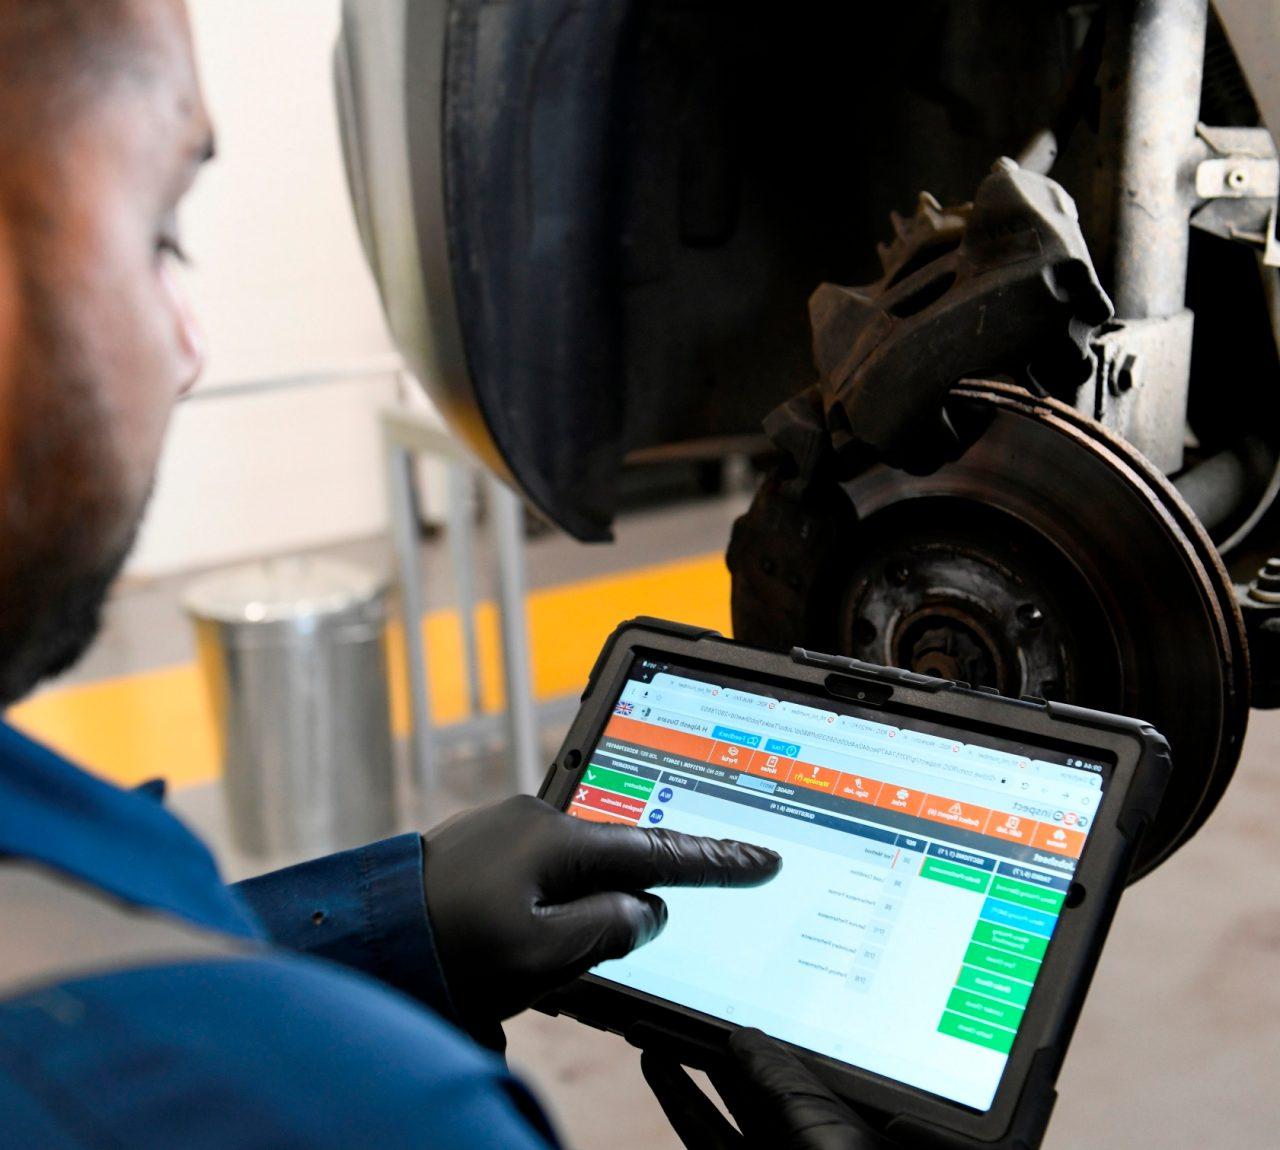 A male Enterprise employee, wearing a black glove in an auto mechanic's garage, points at an iPad.